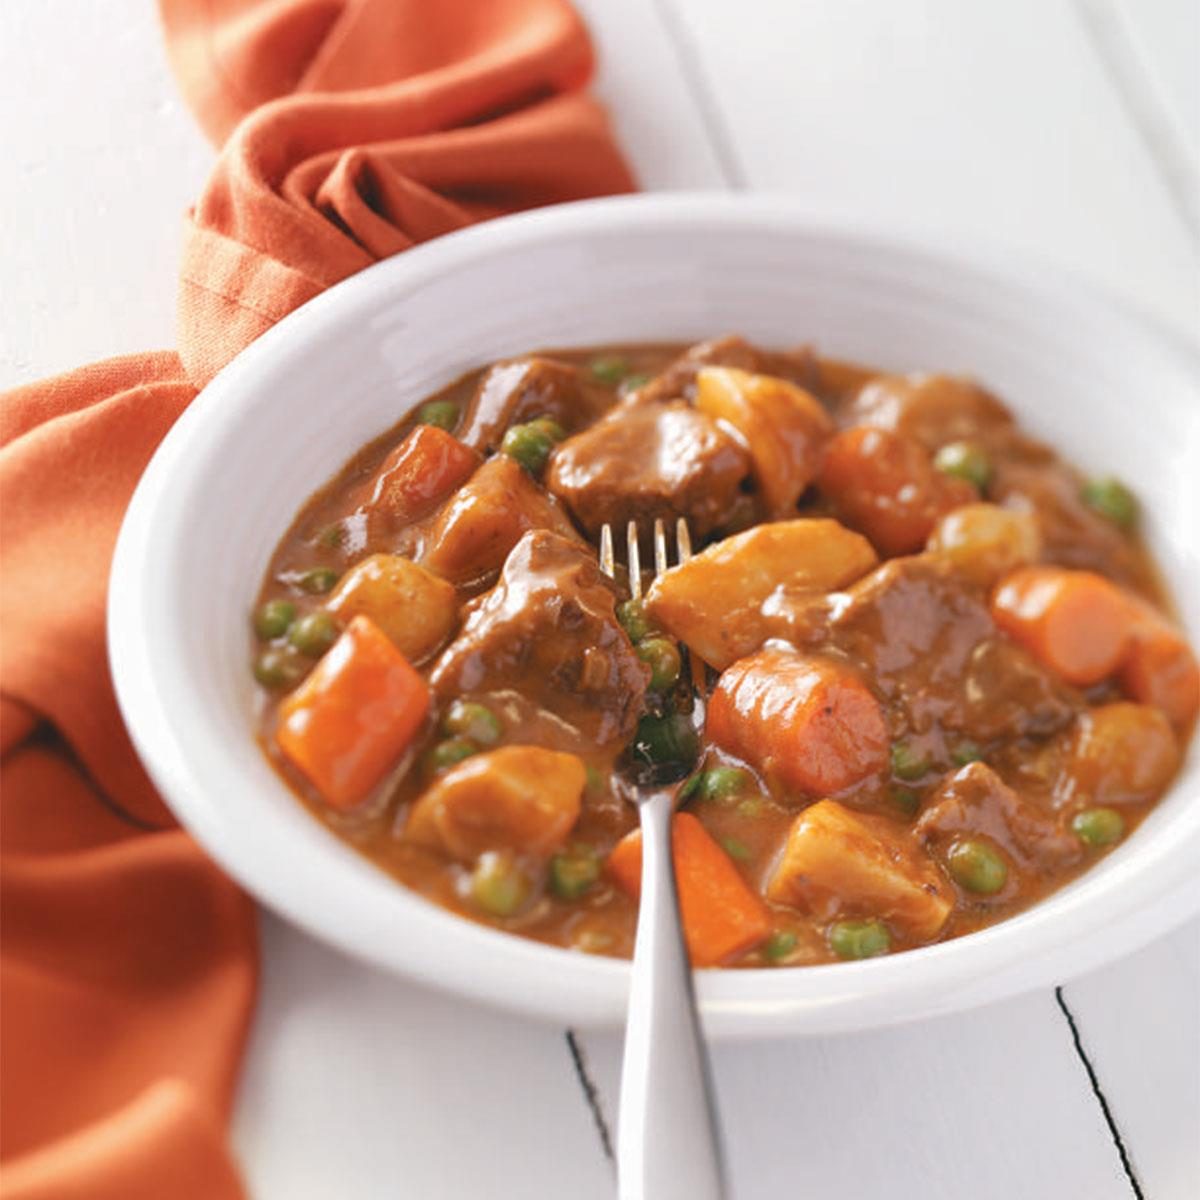 Home-Style Stew Recipe: How to Make It